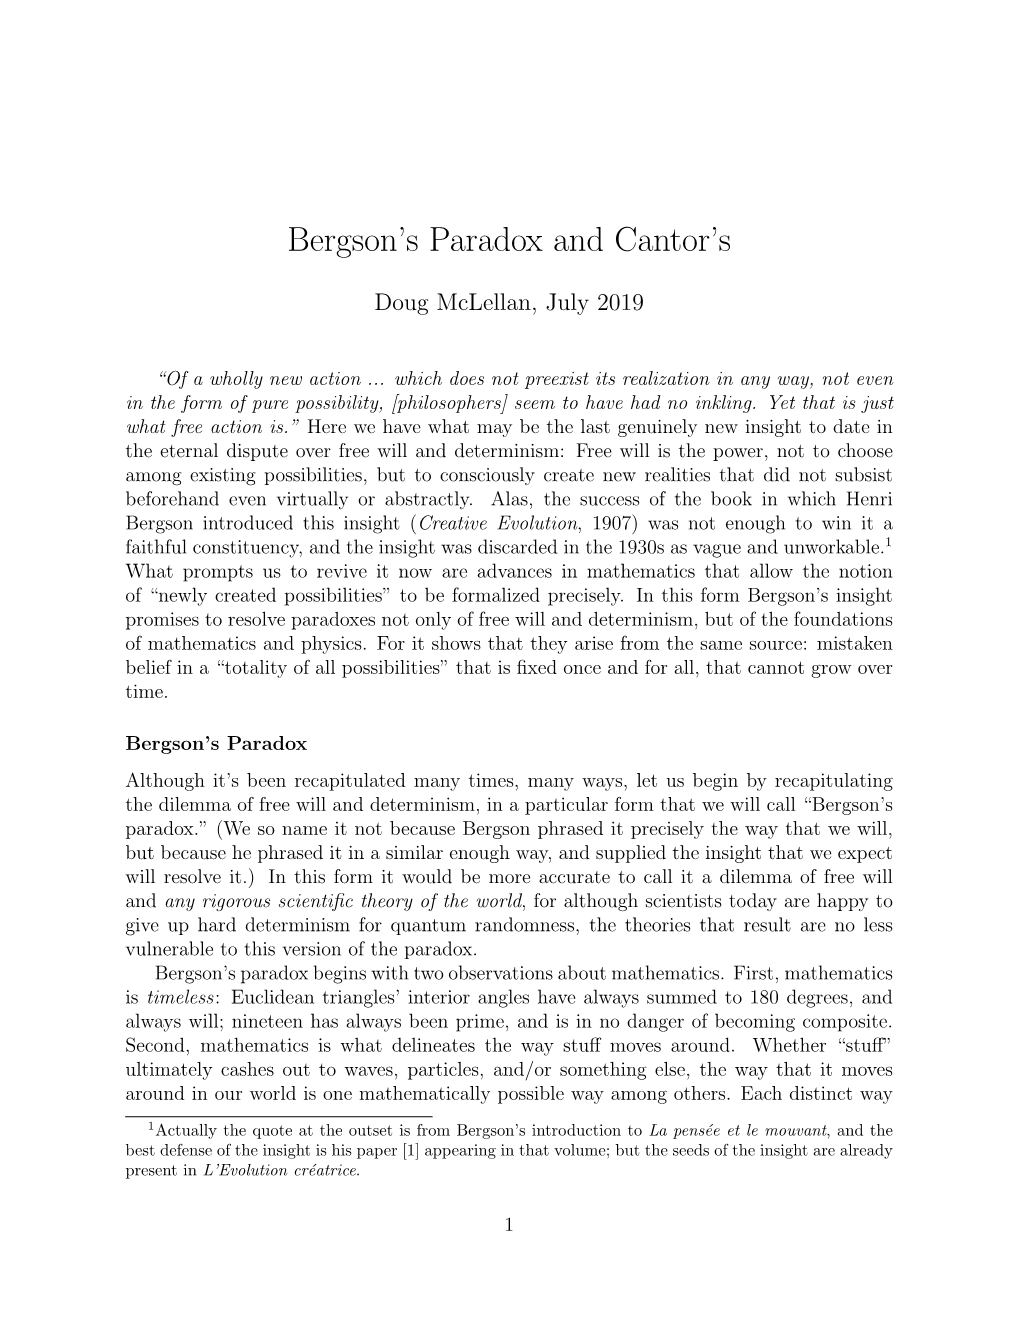 Bergson's Paradox and Cantor's